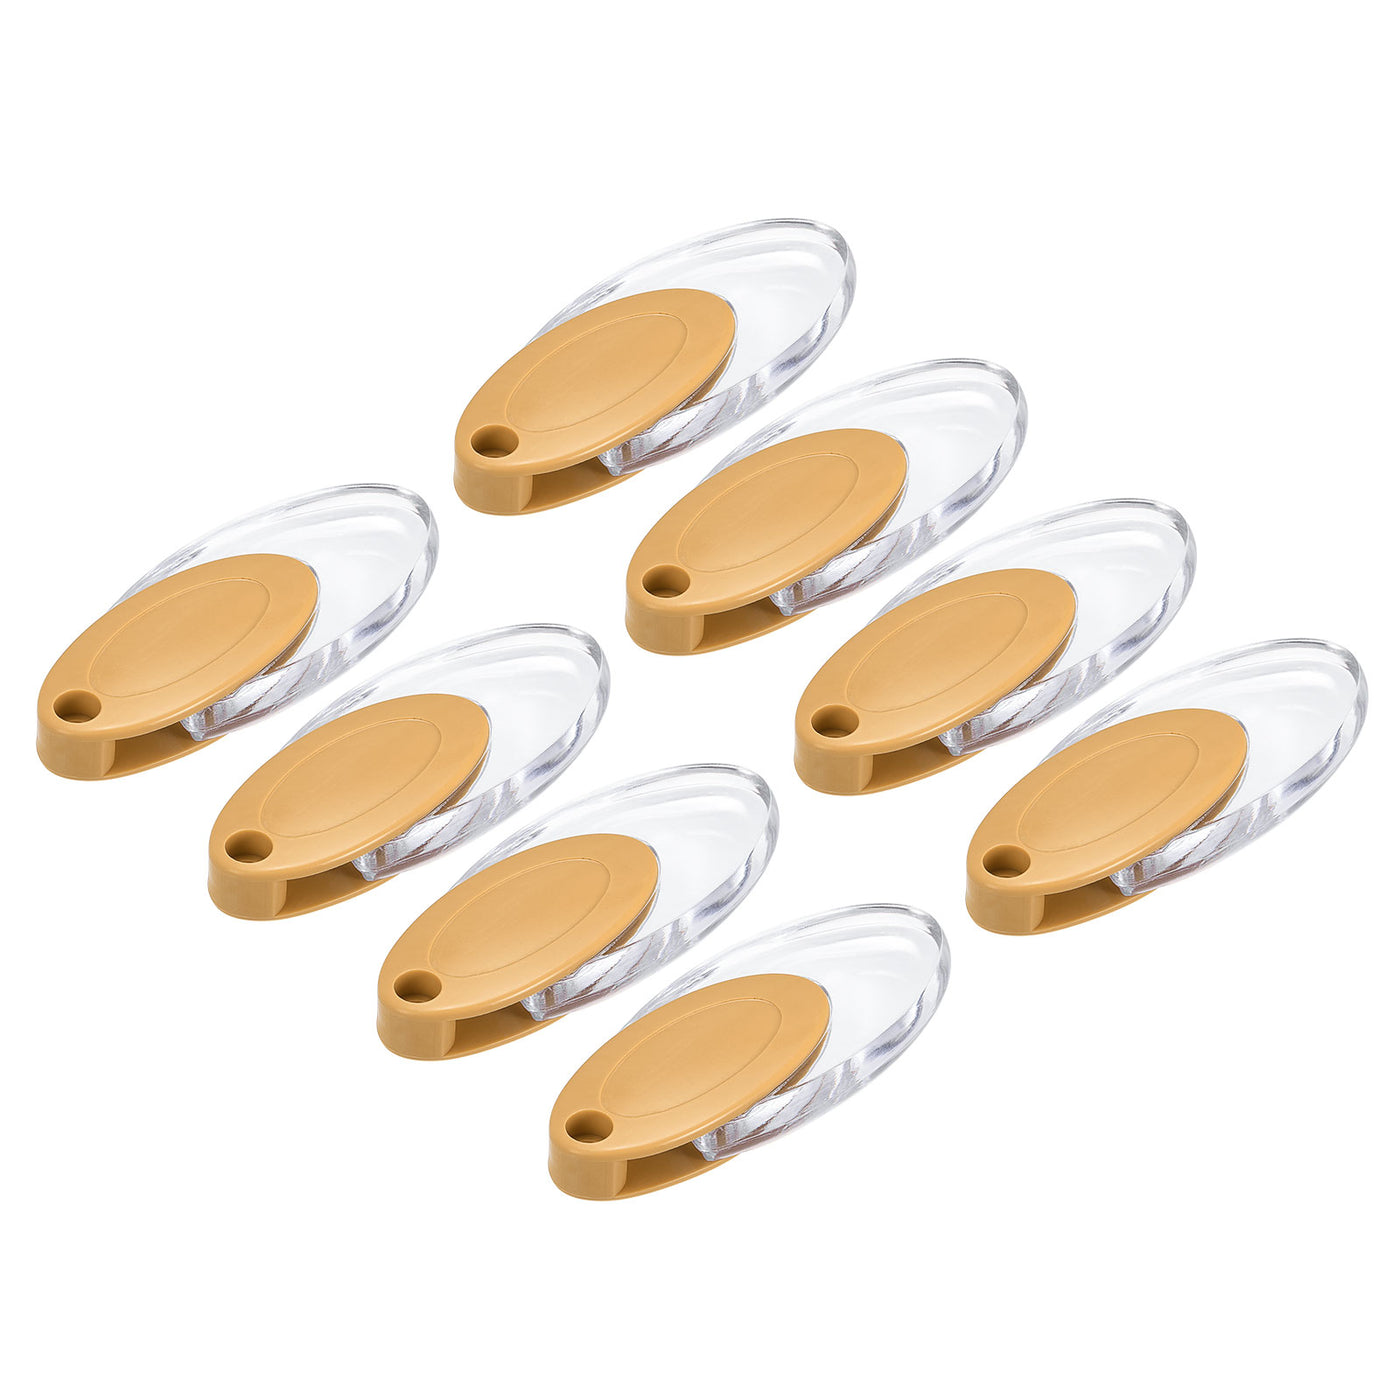 uxcell Uxcell Blinds Chain Handle, 8Pcs 90mm Roller Shade Cord Weights for Window Parts, Khaki